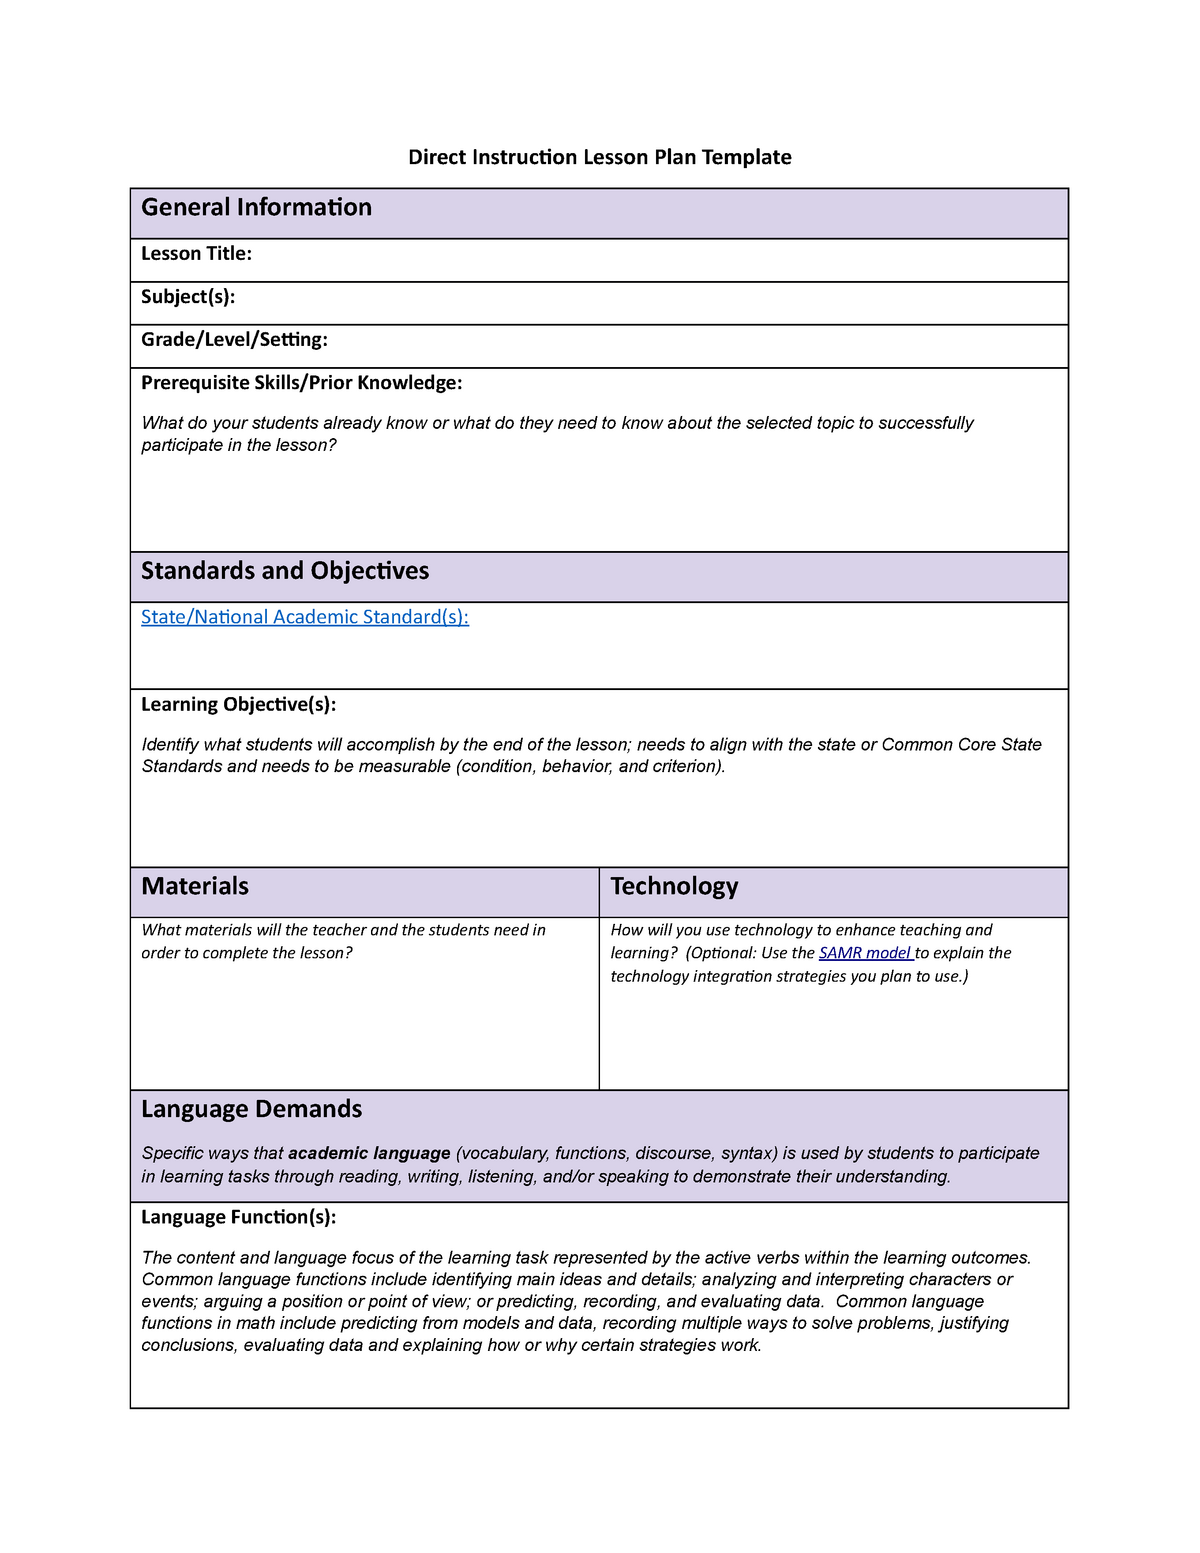 Direct instruction lesson plan template Direct Instruction Lesson